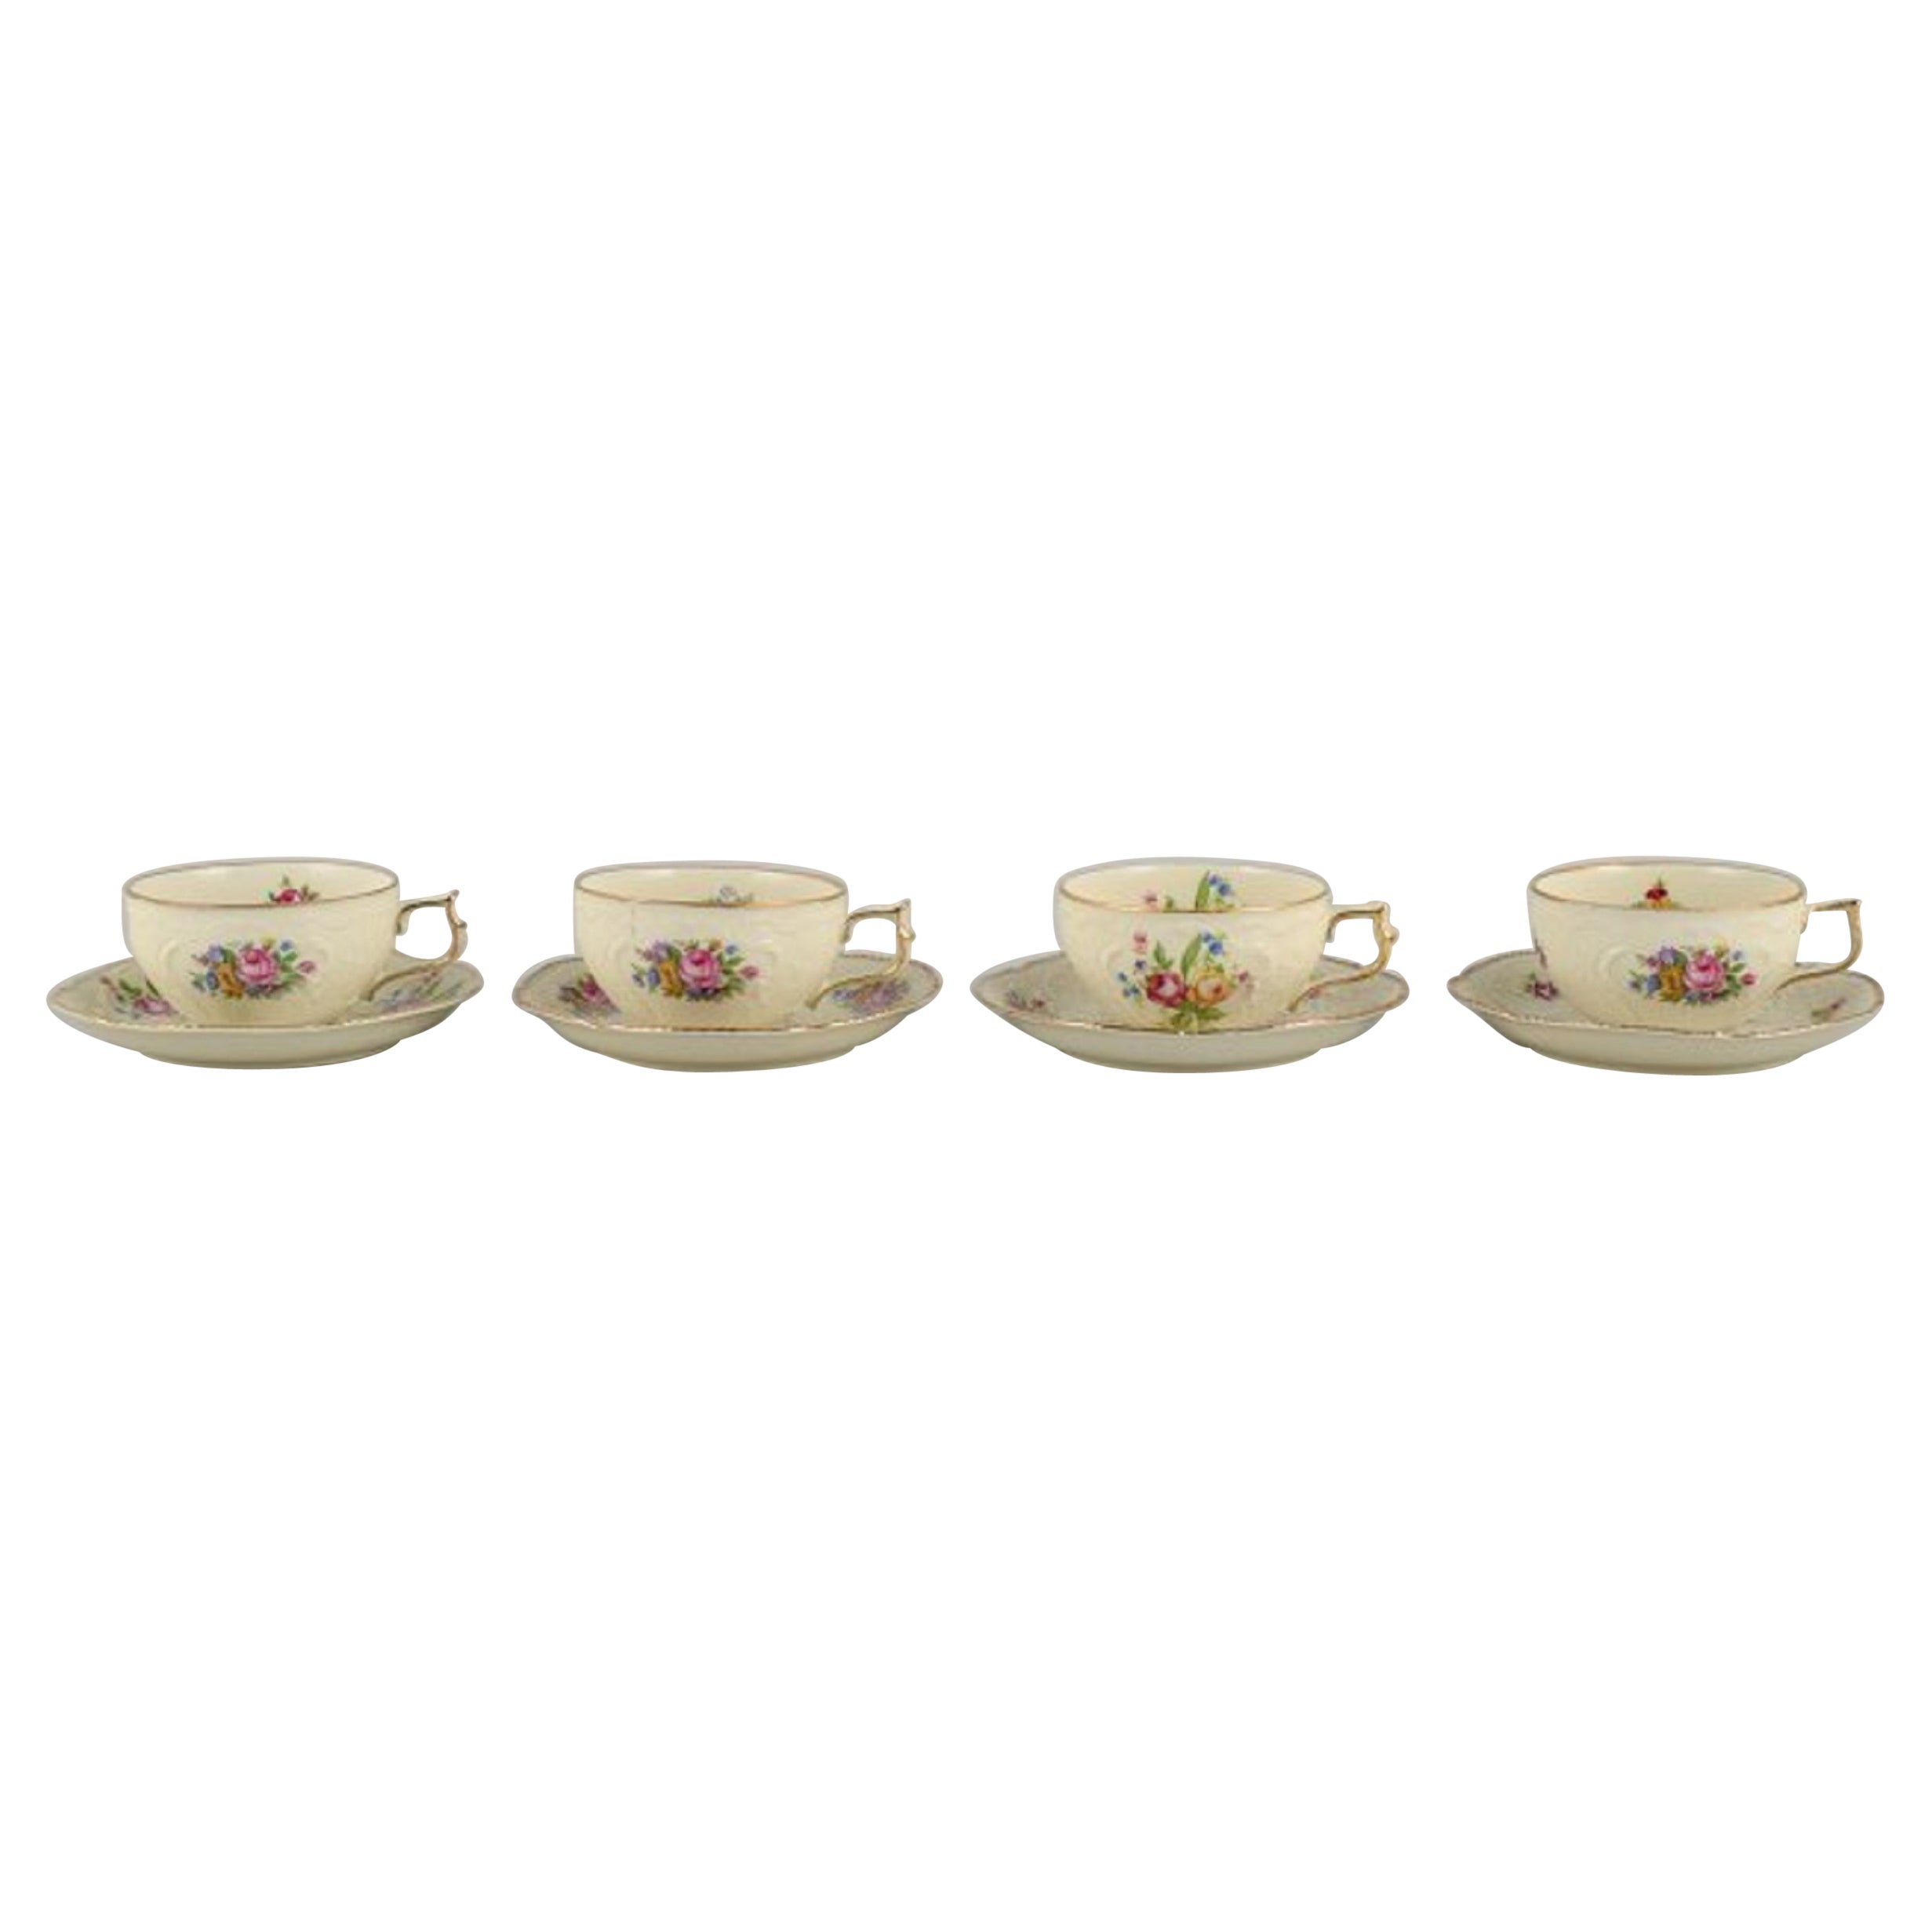 Rosenthal, Germany, "Sanssouci", Four Mocha Cups with Saucers, circa 1930s